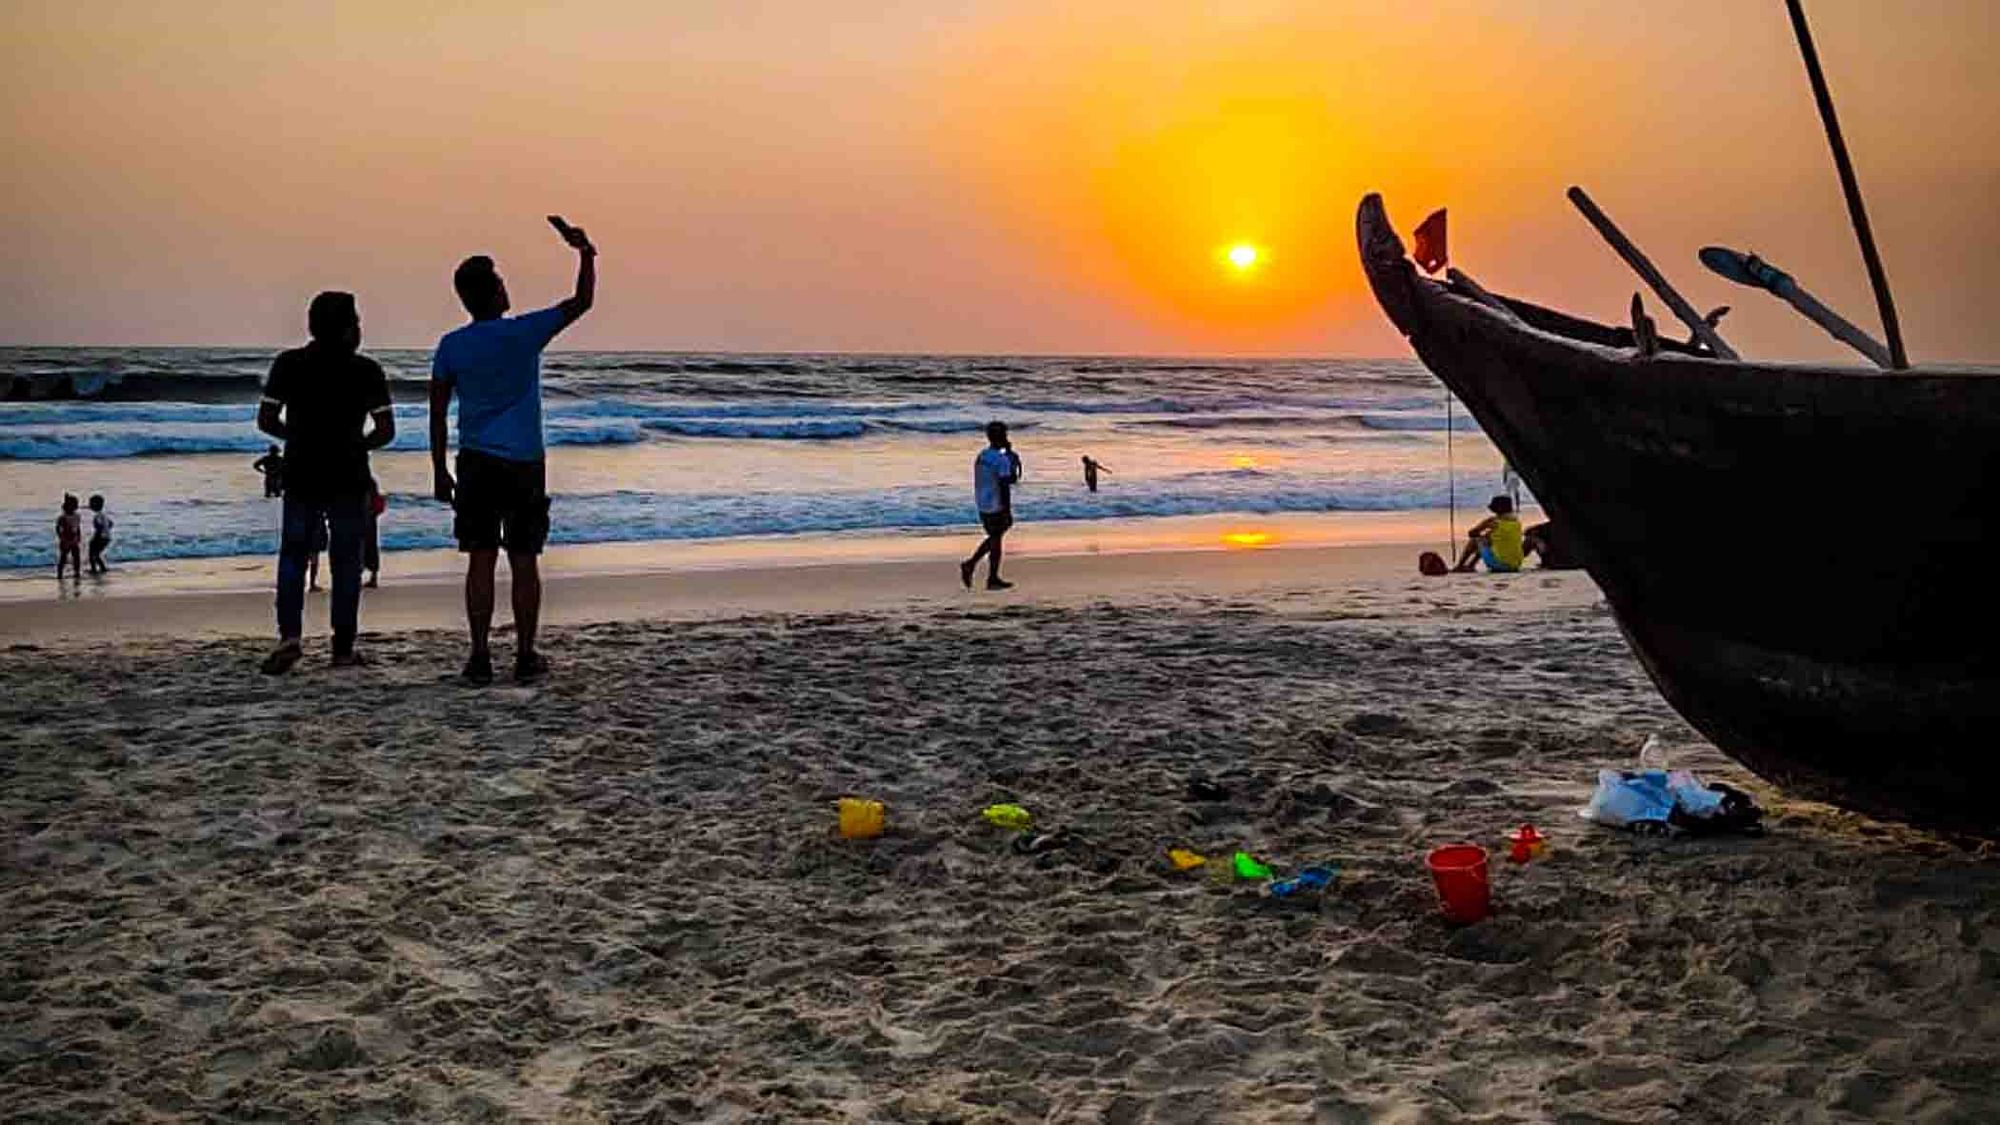 FAQ: Goa Opens For Domestic Tourism – What Are The New Rules?